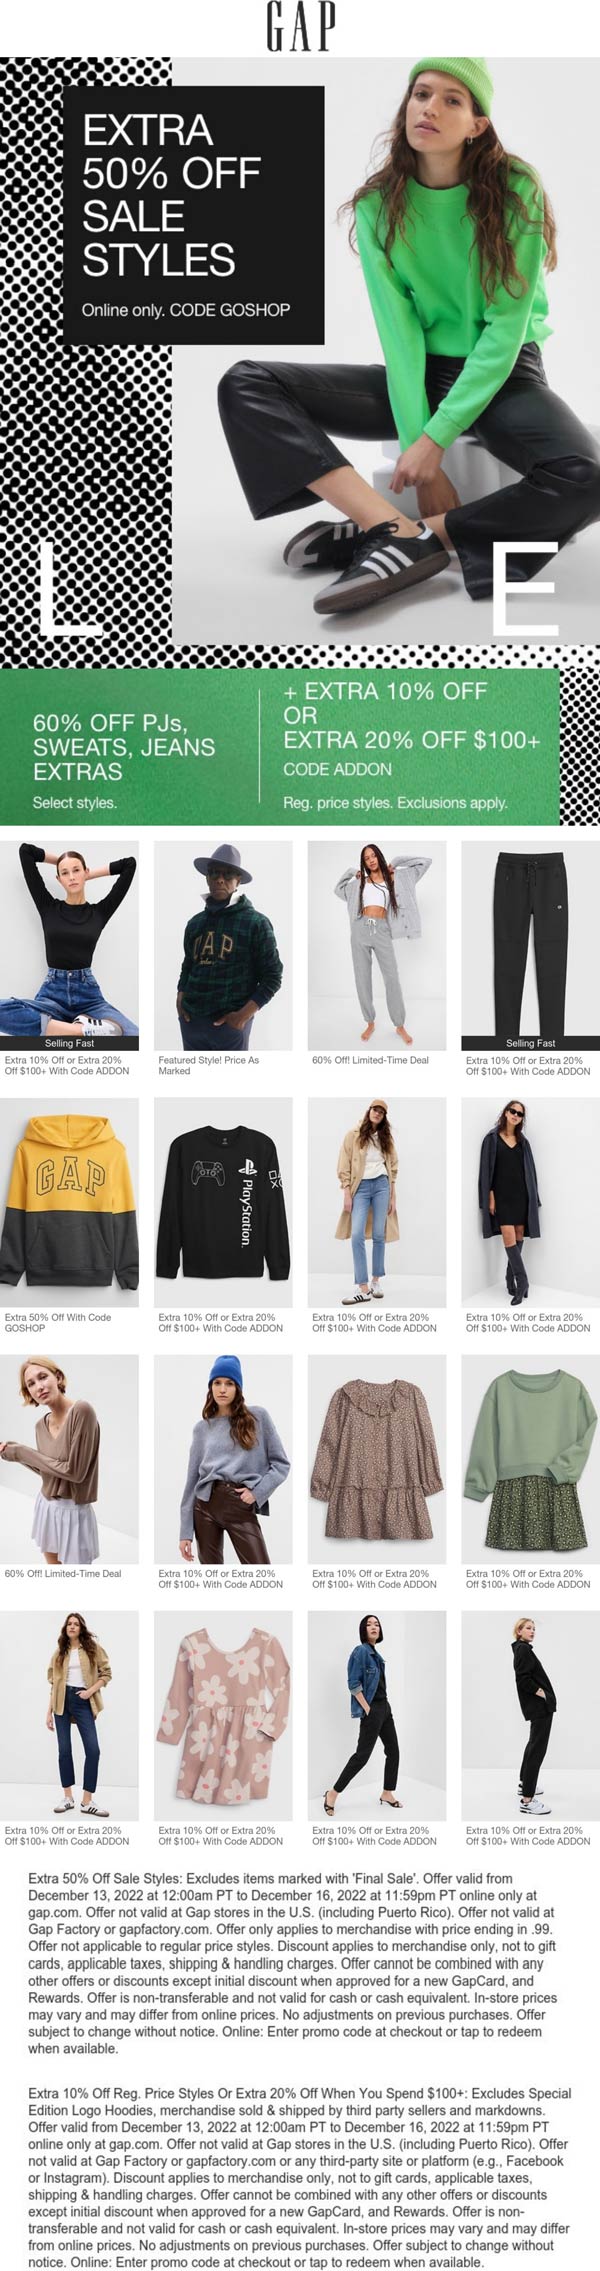 Gap stores Coupon  Extra 50% off sale styles online at Gap via promo code GOSHOP #gap 